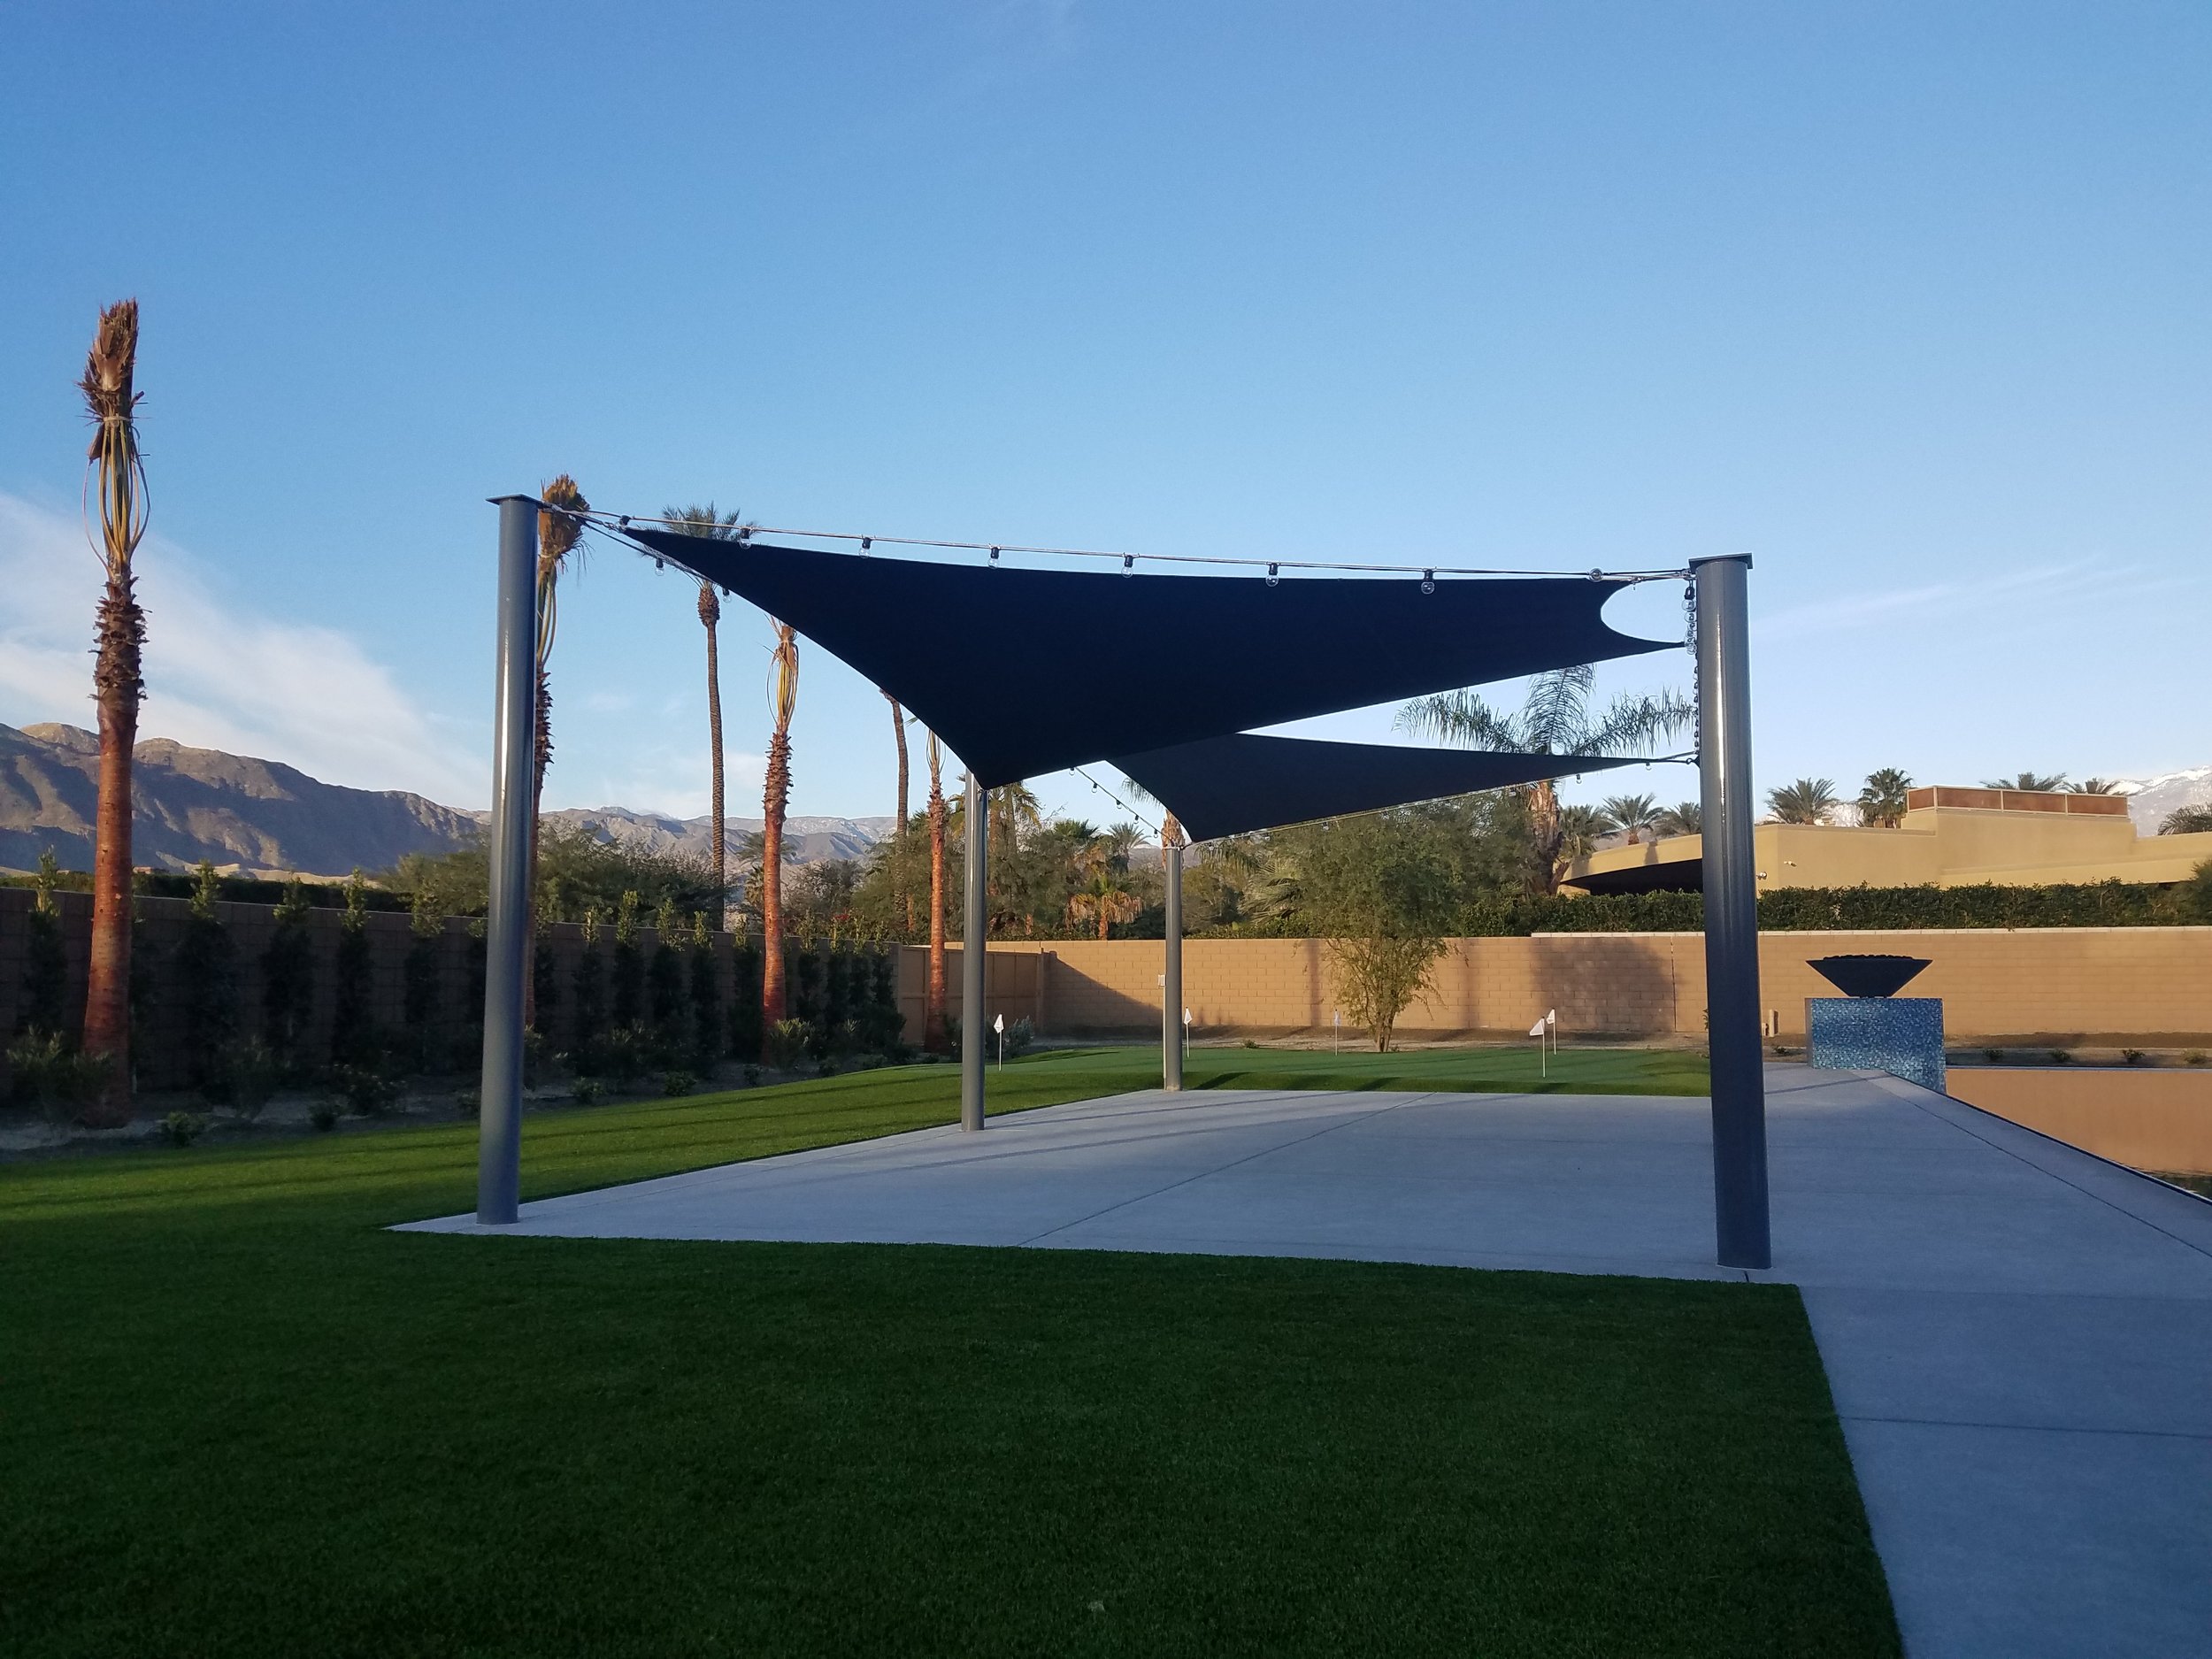 Custom tension shade structure, Rancho Mirage 92270